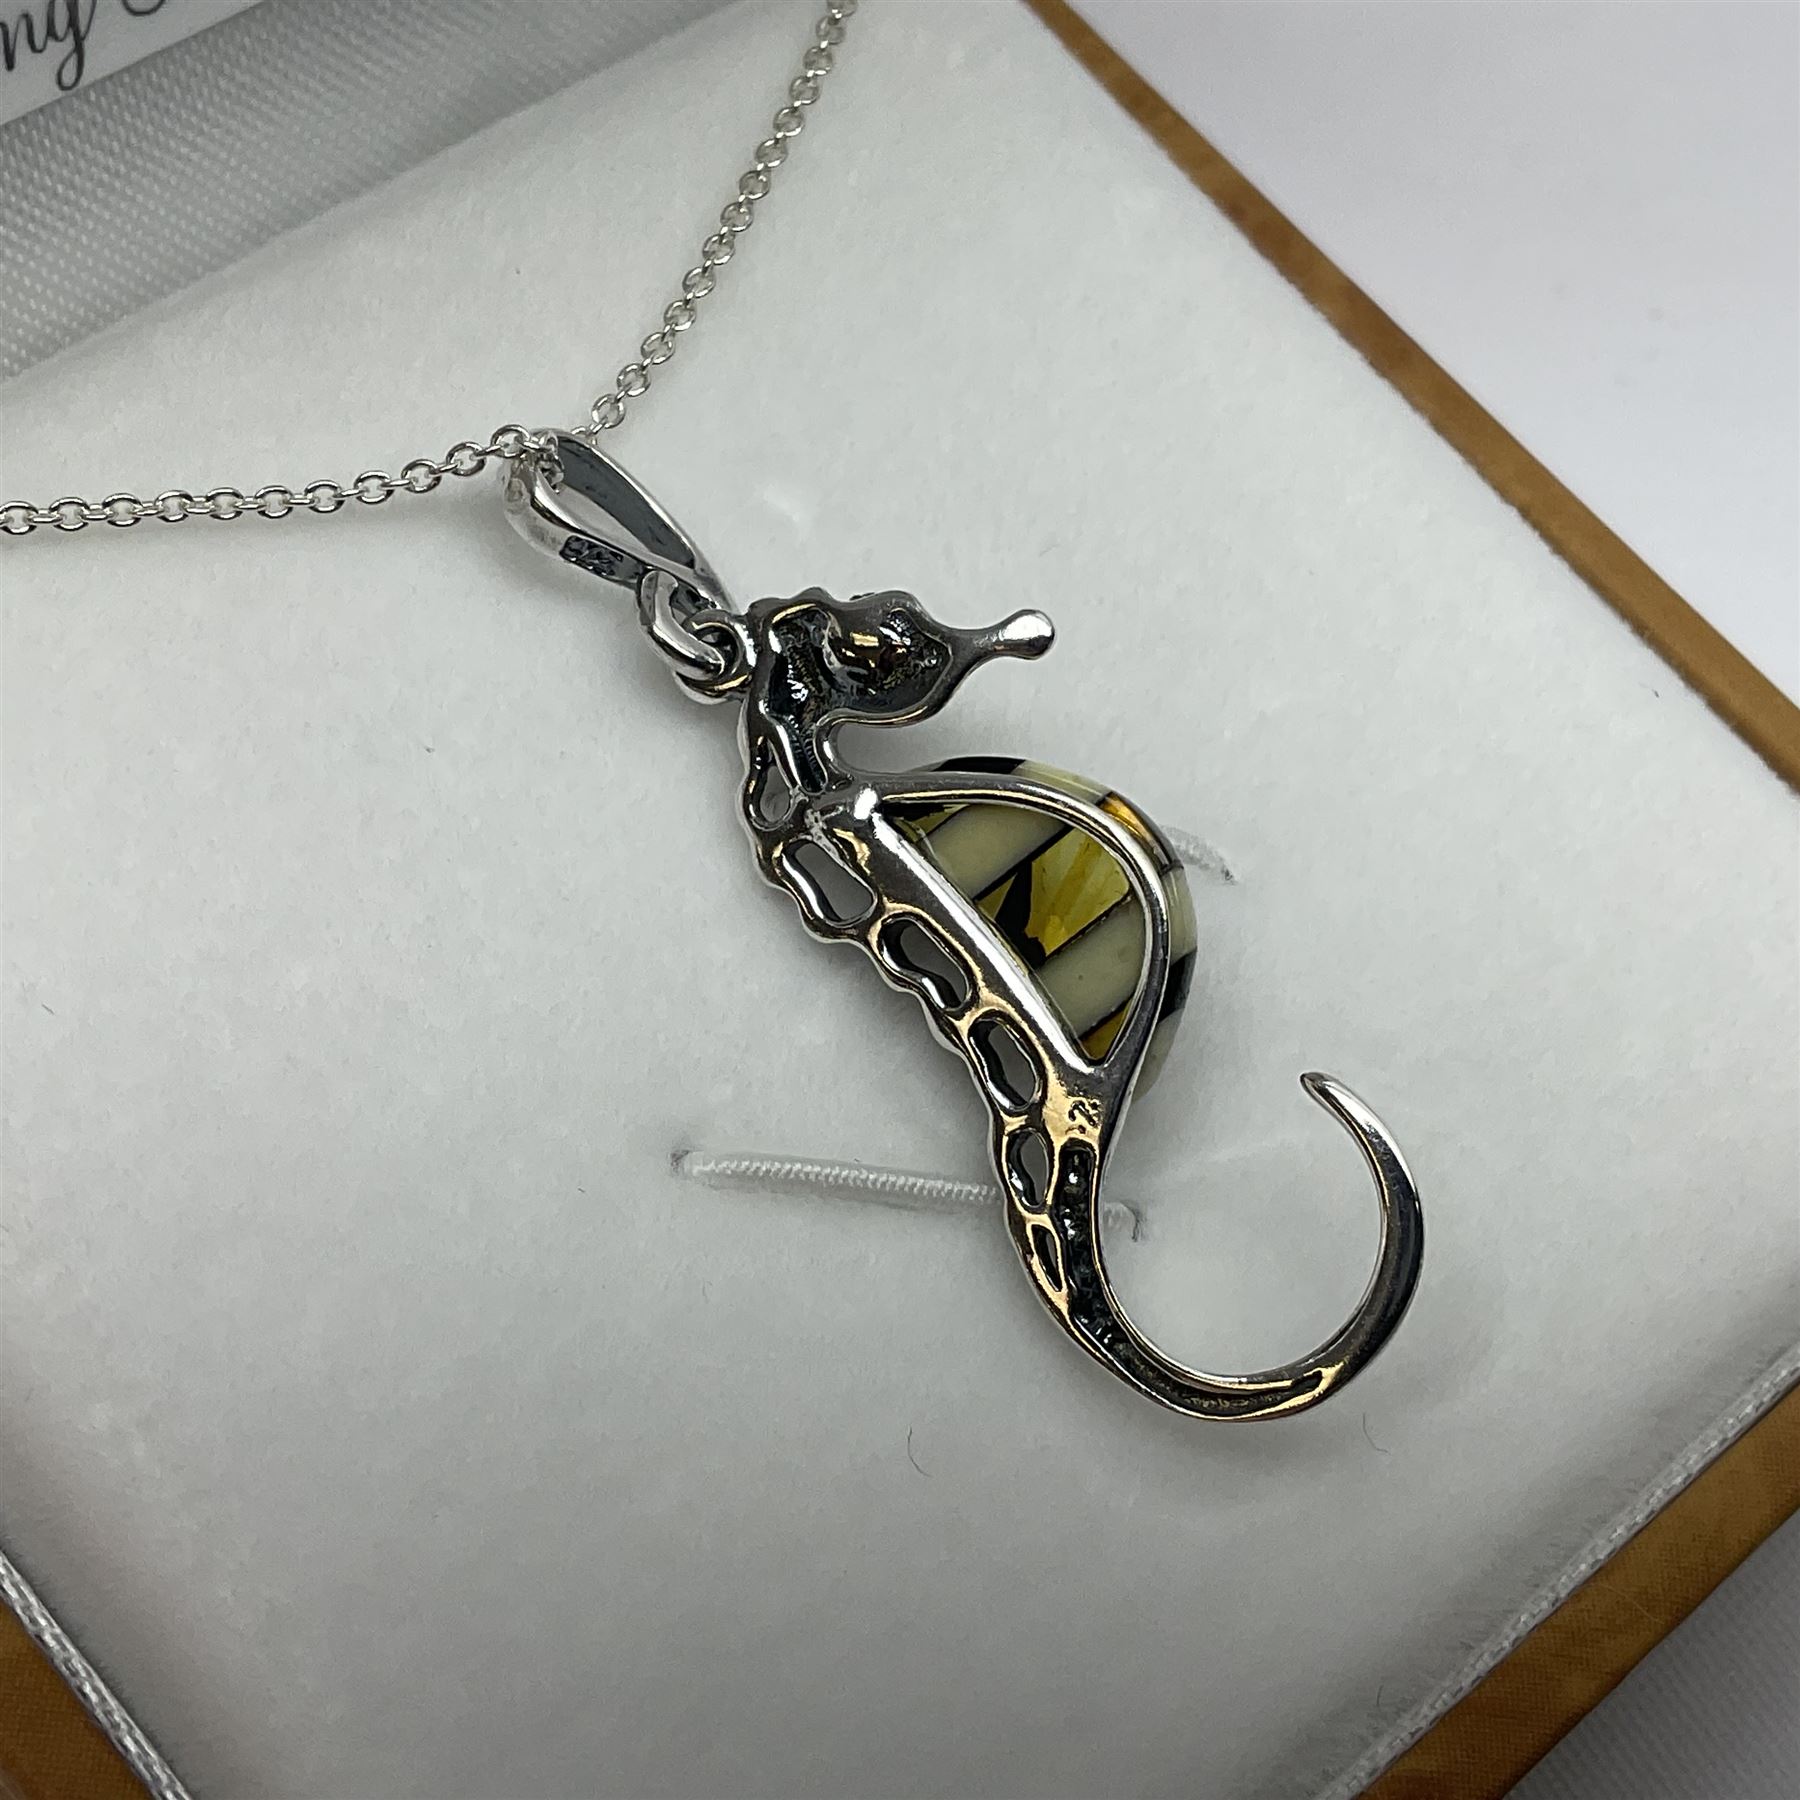 Silver Baltic amber seahorse pendant necklace - Image 3 of 3